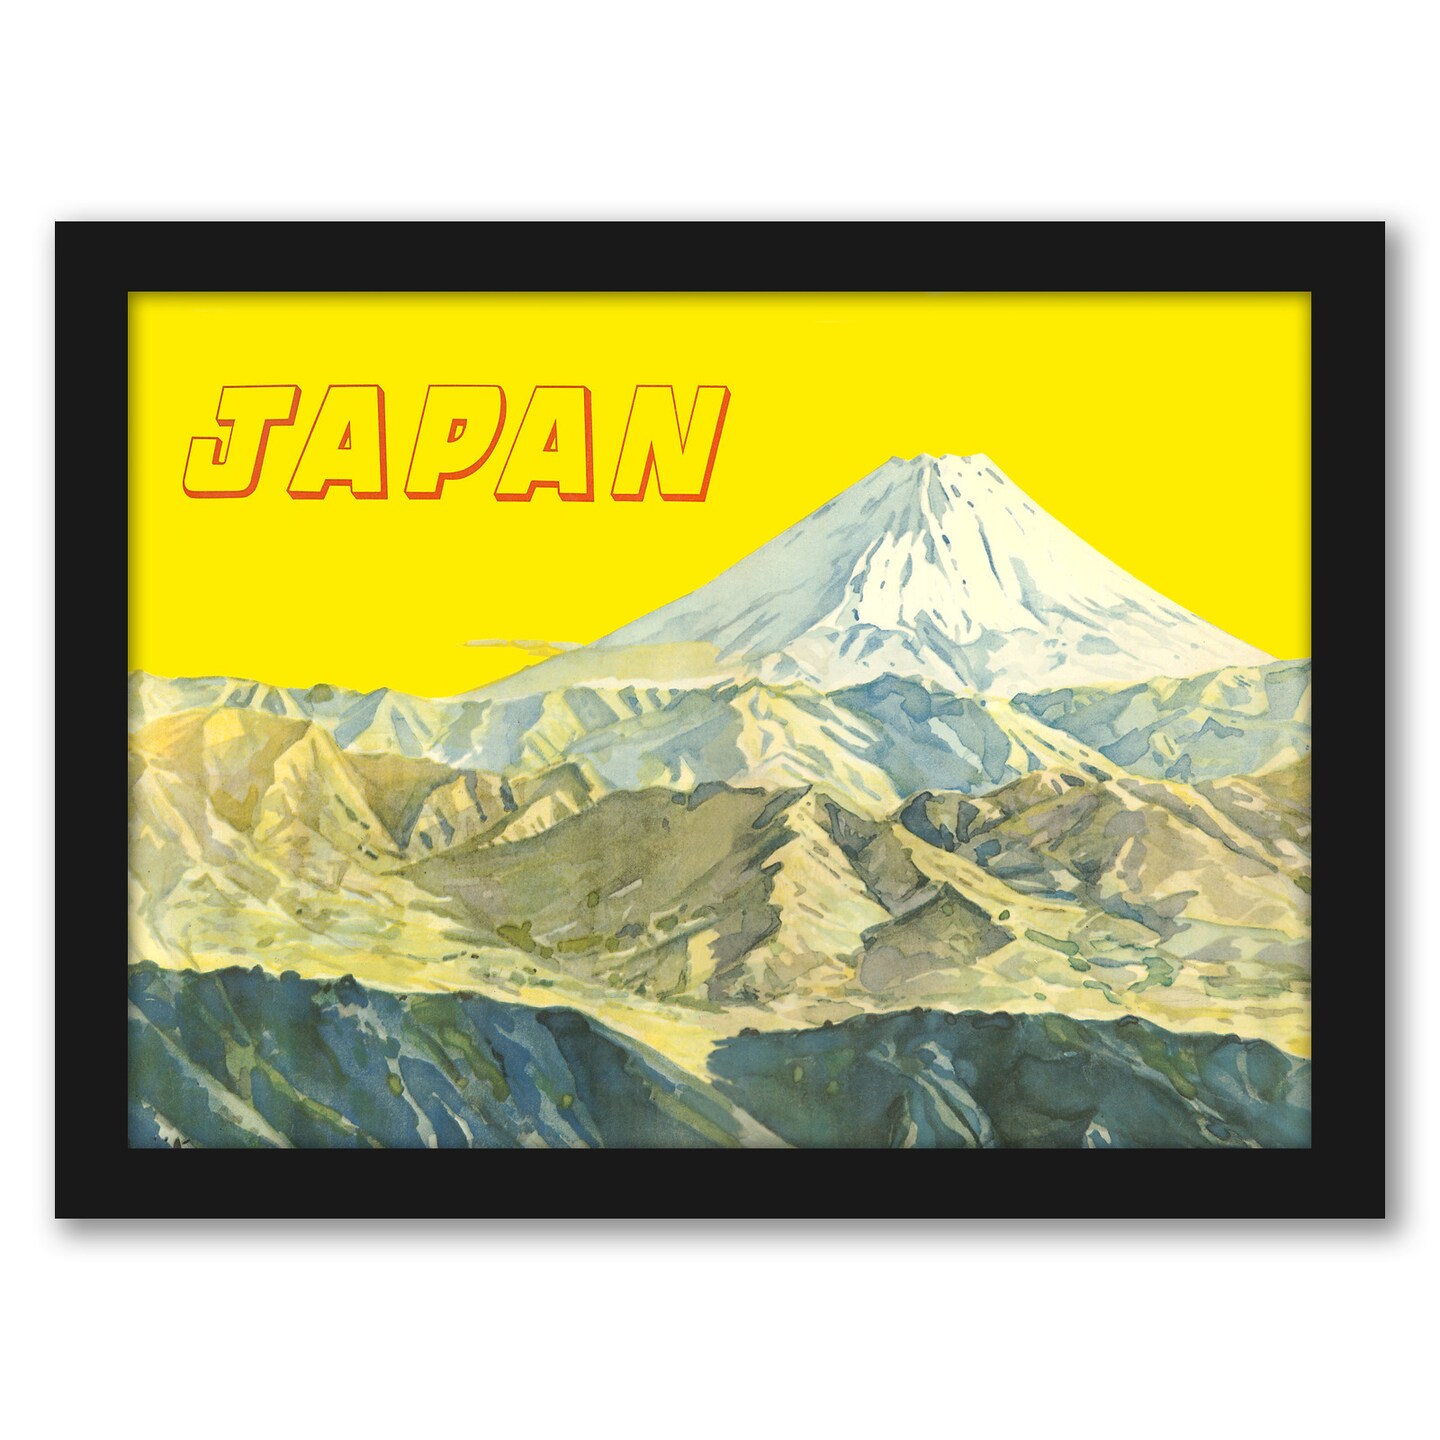 Travel Poster For Japan by Found Image Press Frame  - Americanflat